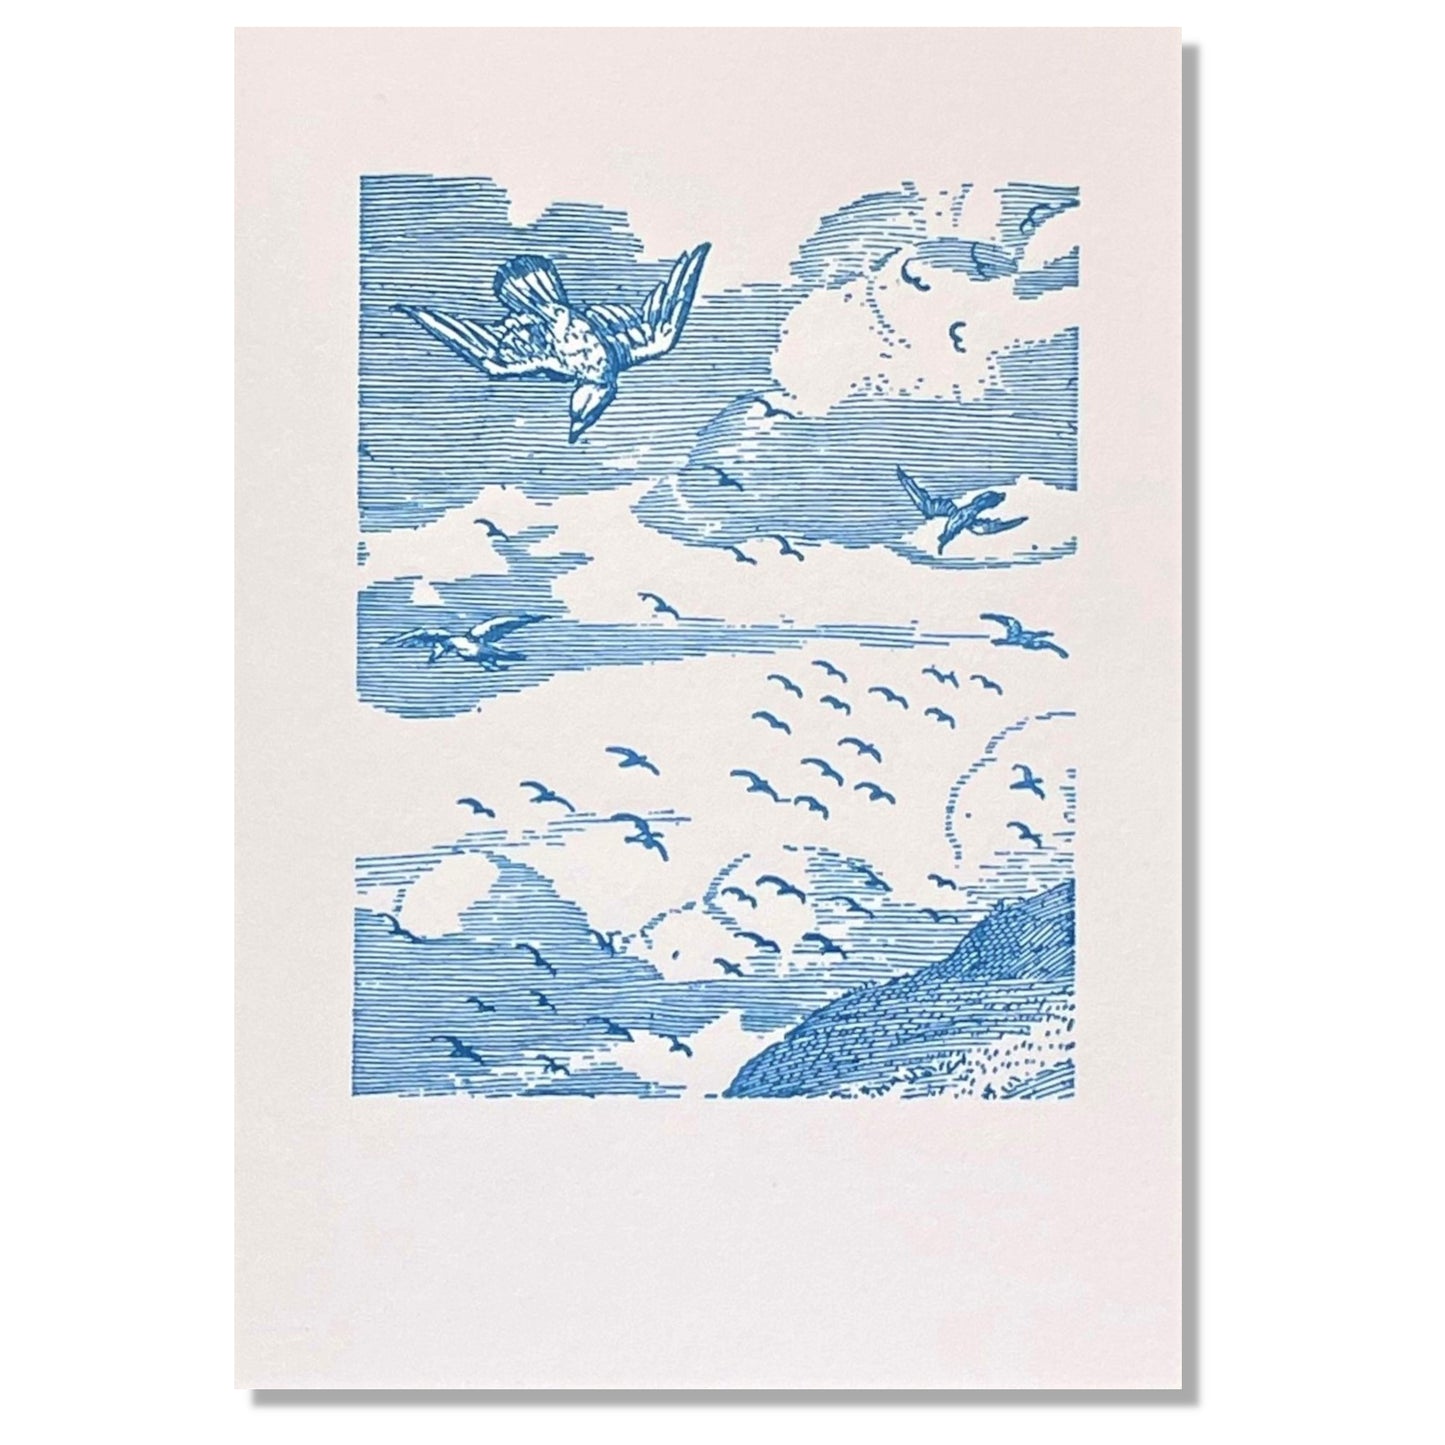 letterpress greetings card of a drawing of birds flying over the bass rock, blue ink on white by Passenger Press